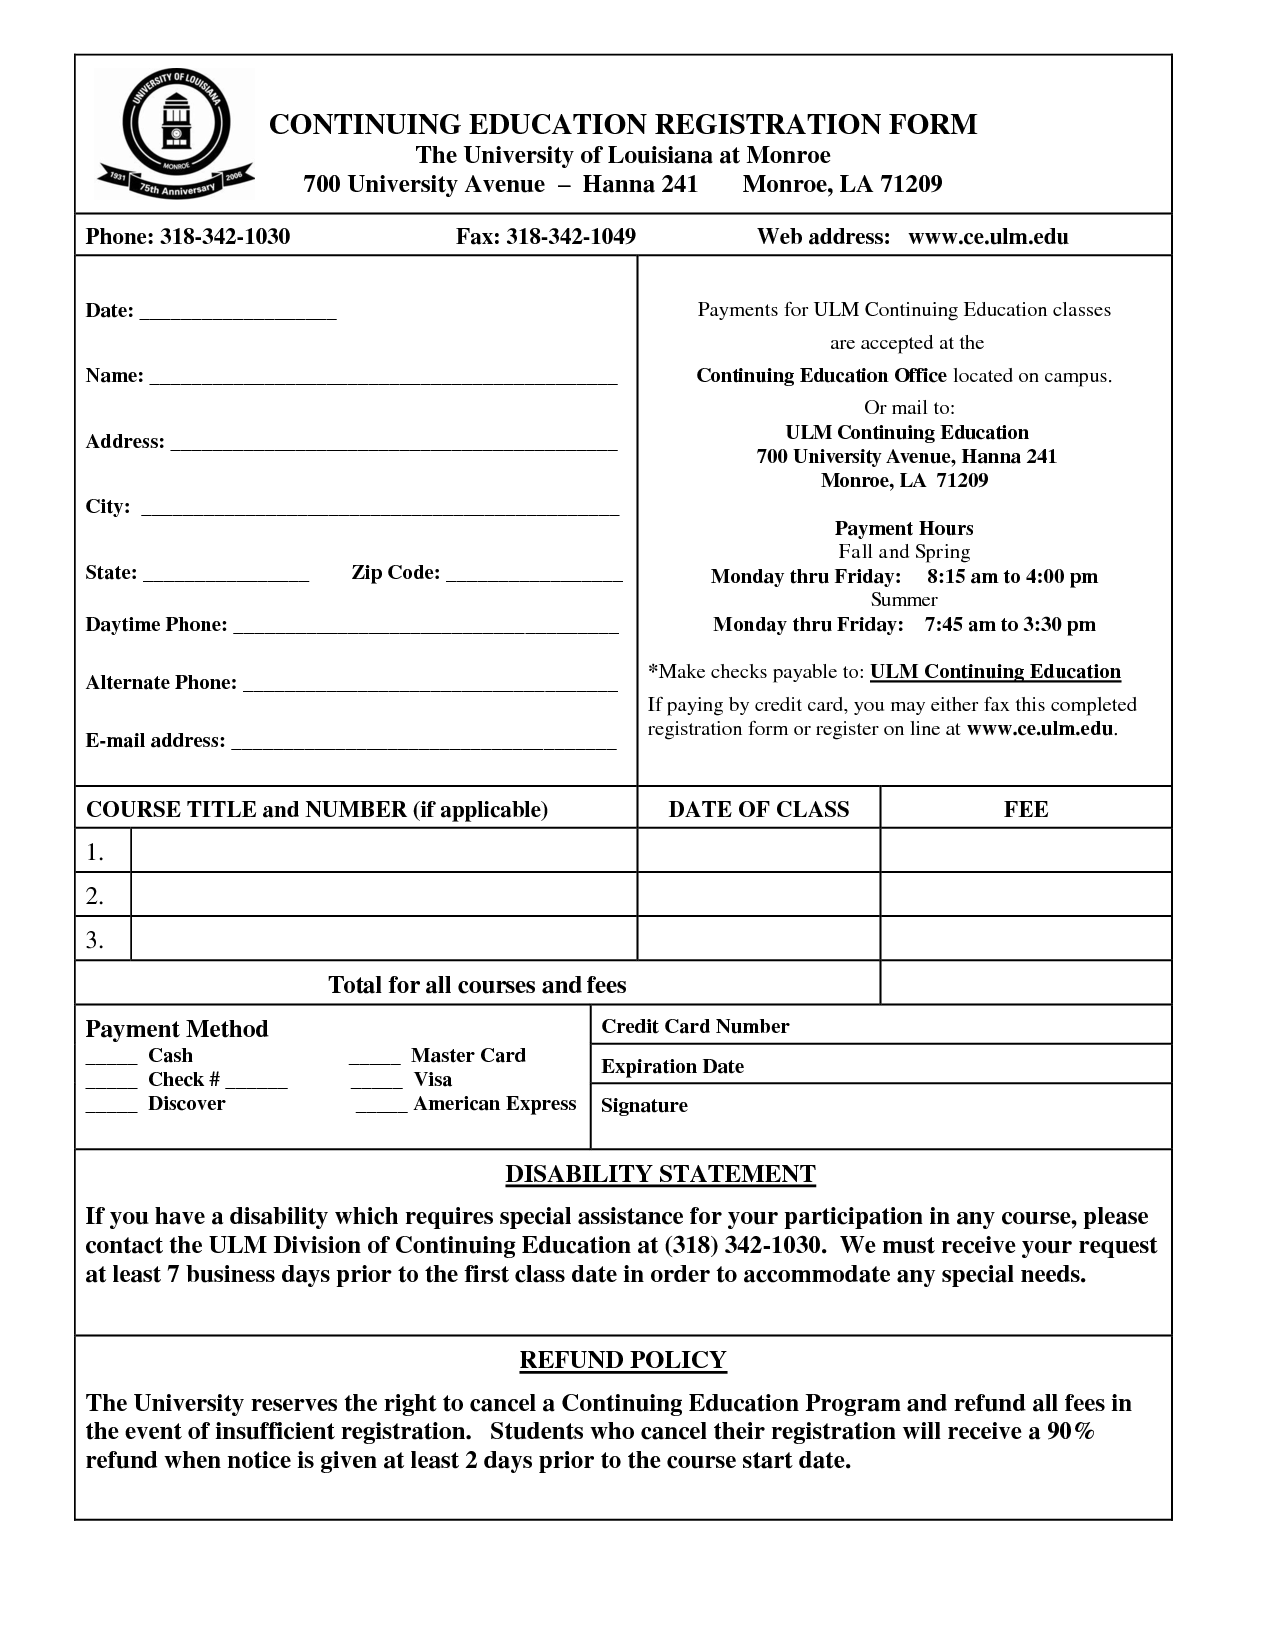 Application Packet For Free And Reduced Price School Meals Form 